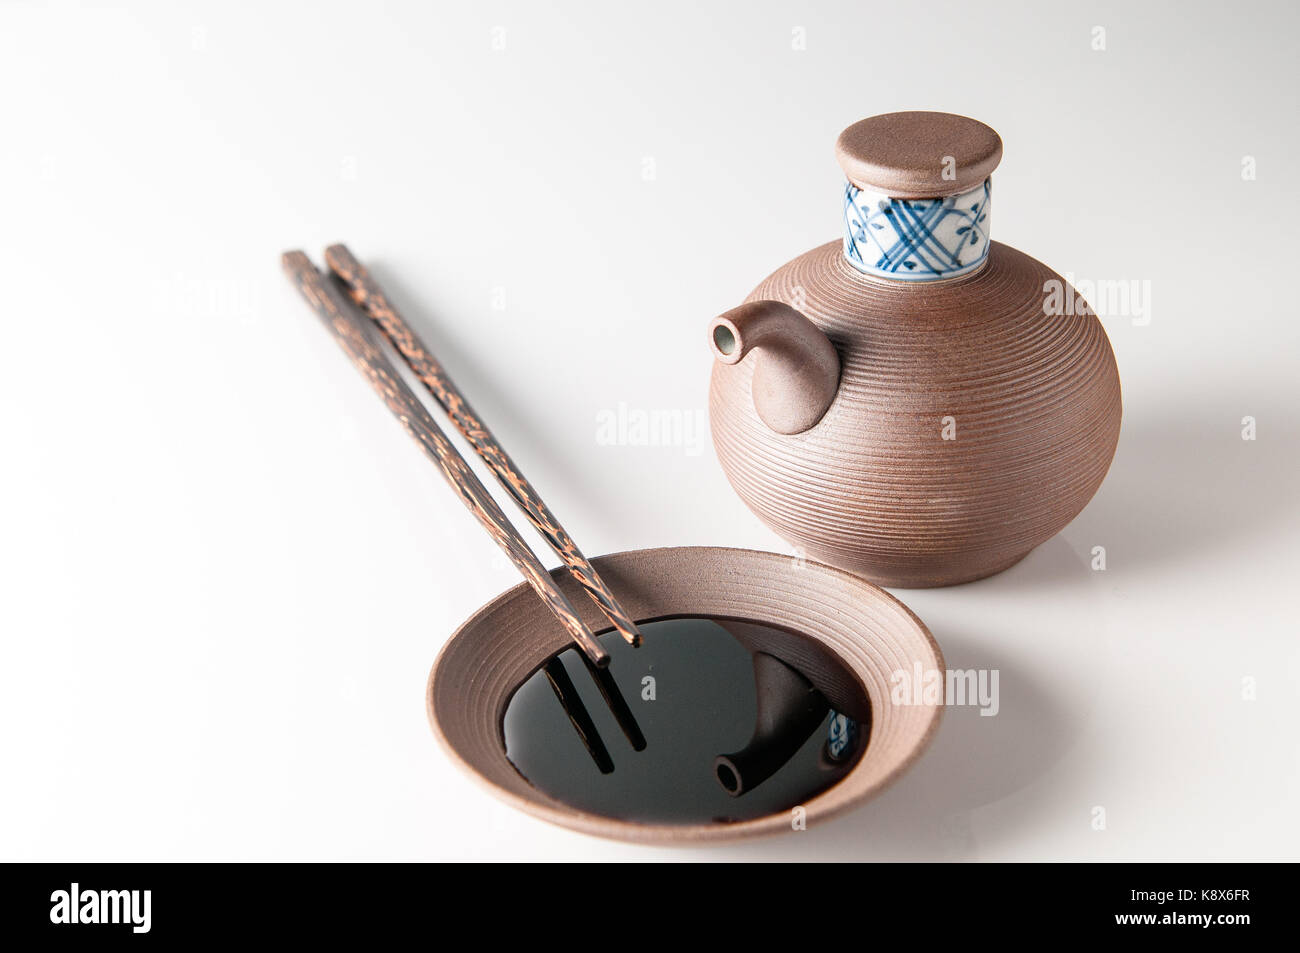 Ceramic jug & saucer for holding / dipping soy sauce. With chop sticks. From Japan. Stock Photo